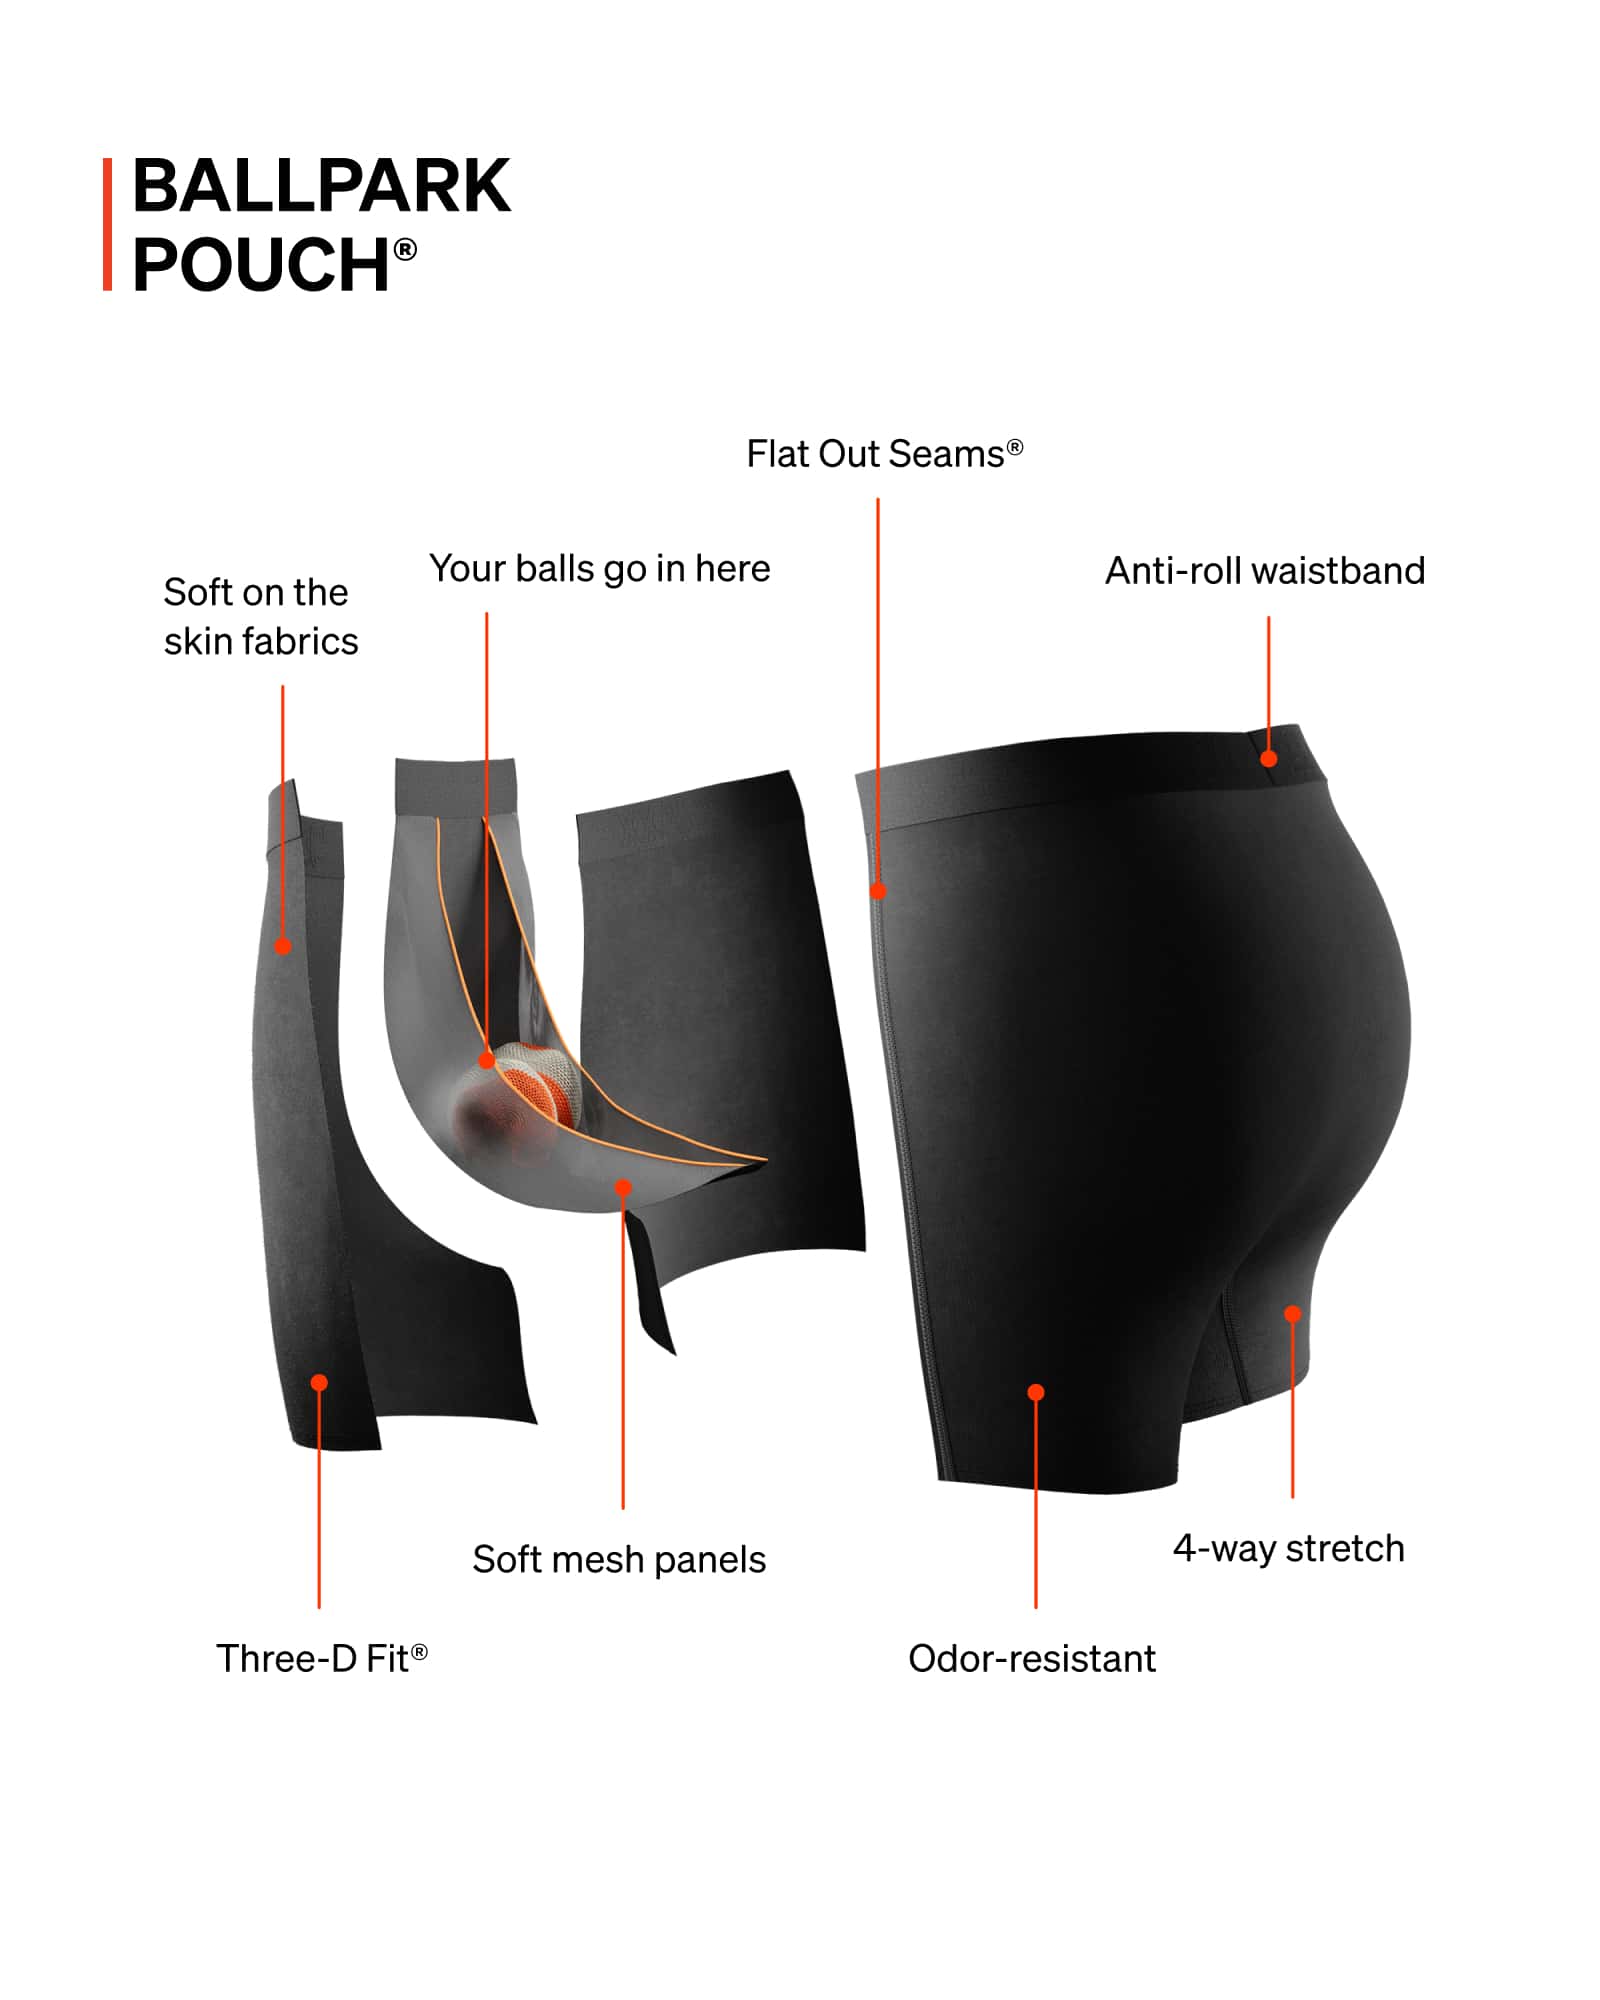 SAXX Underwear BallPark Pouch with Flat Out Seams and Three-D Fit technology